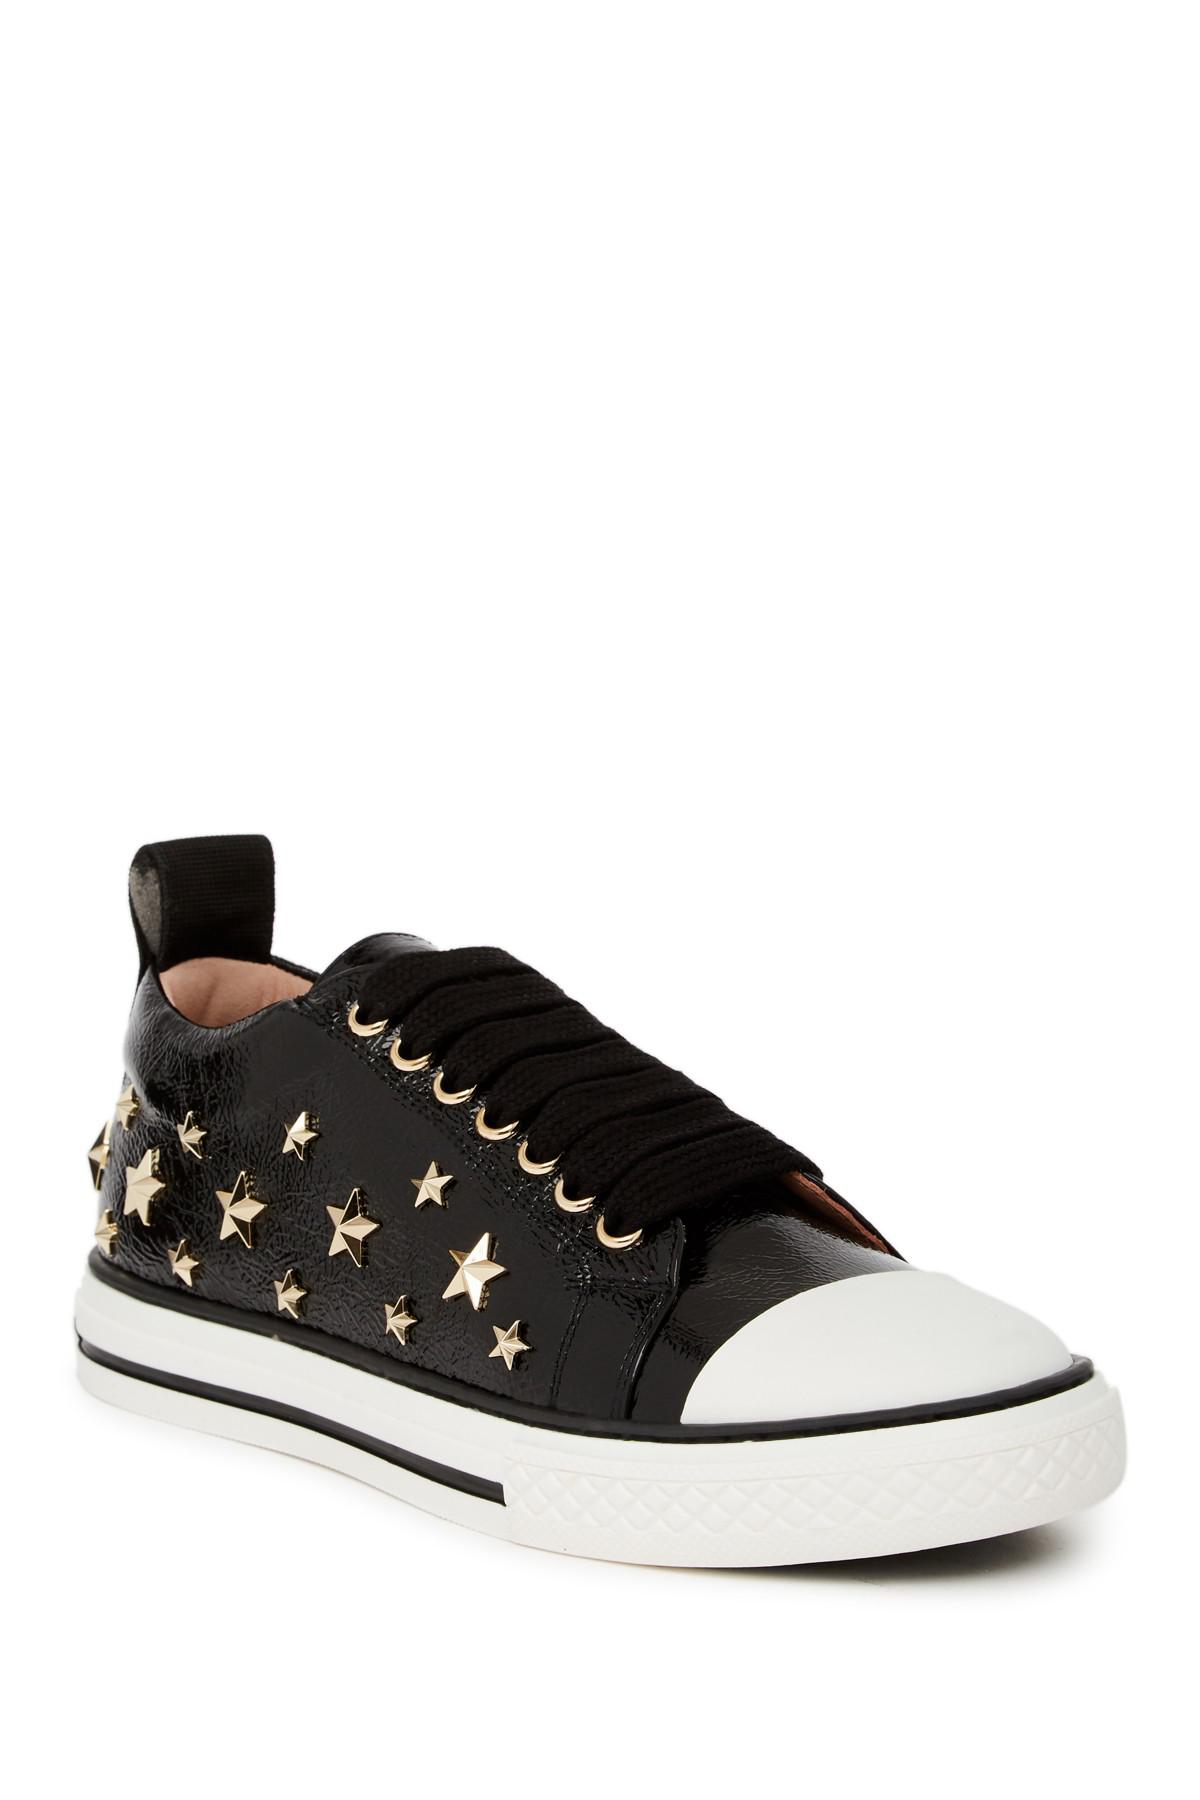 RED Valentino Leather Star Studded Sneaker in Black - Lyst